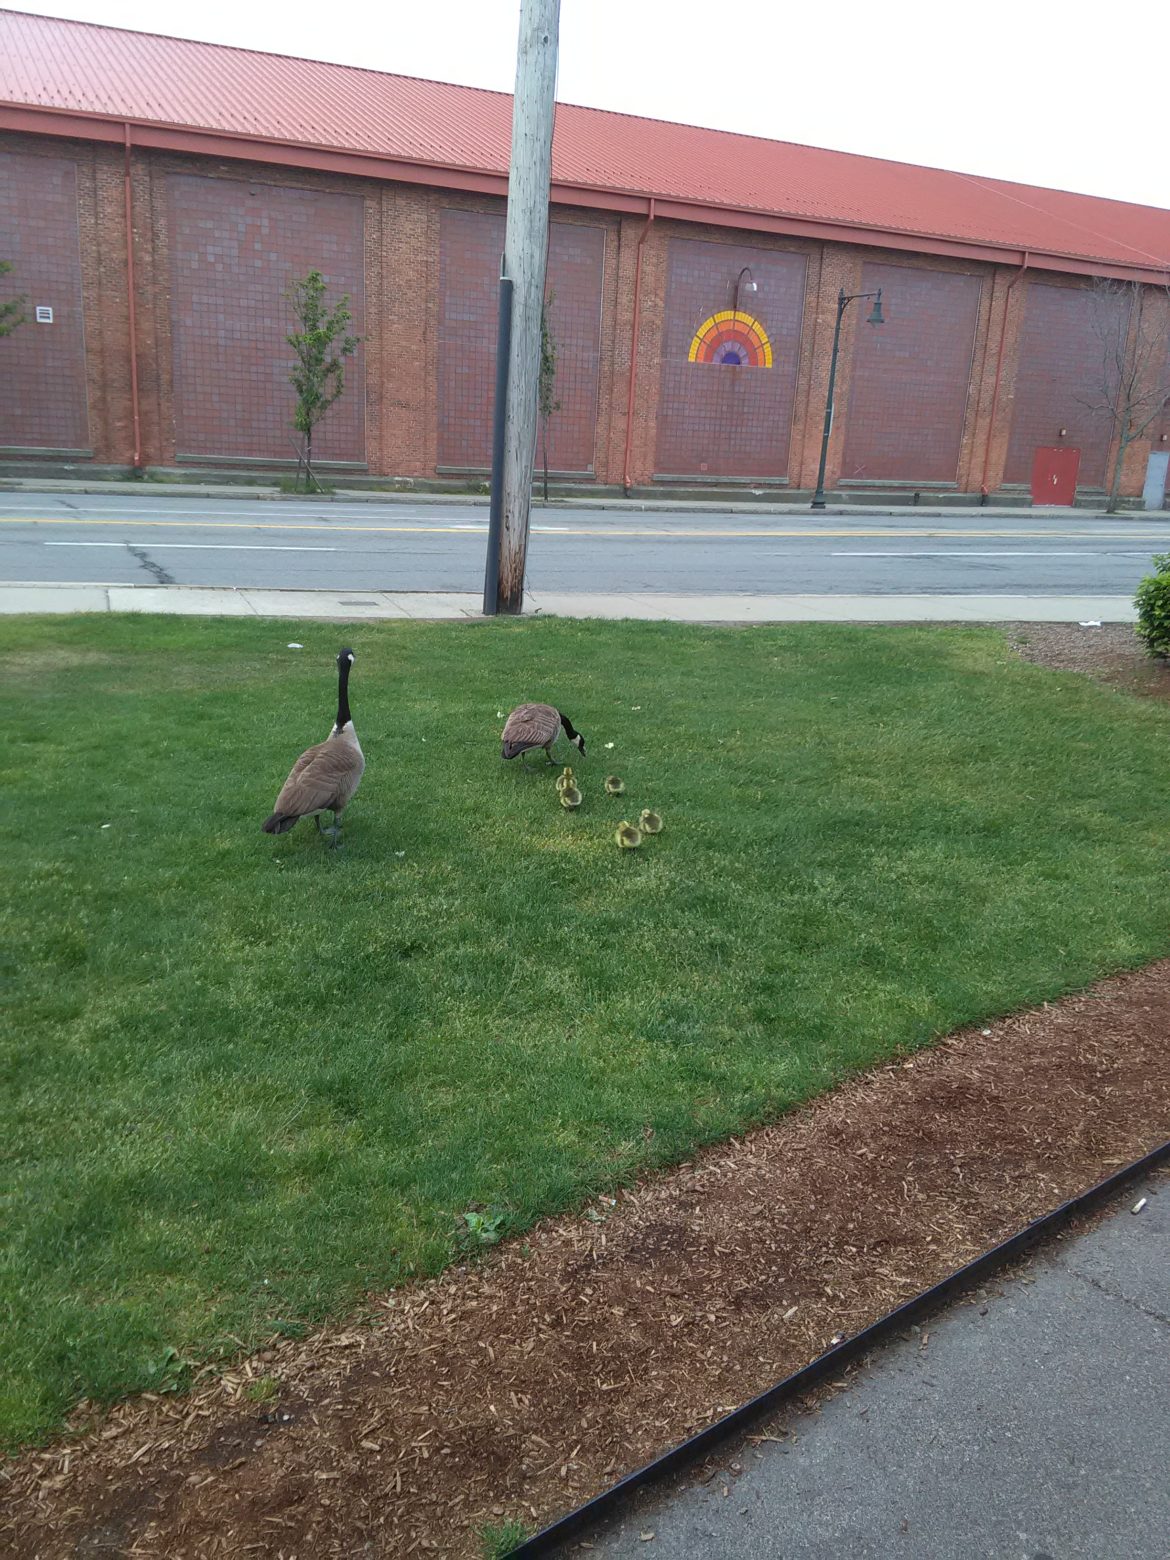 The mother and father geese have made this grassy patch on Arsenal Street their home for four years and this spring they have a family.